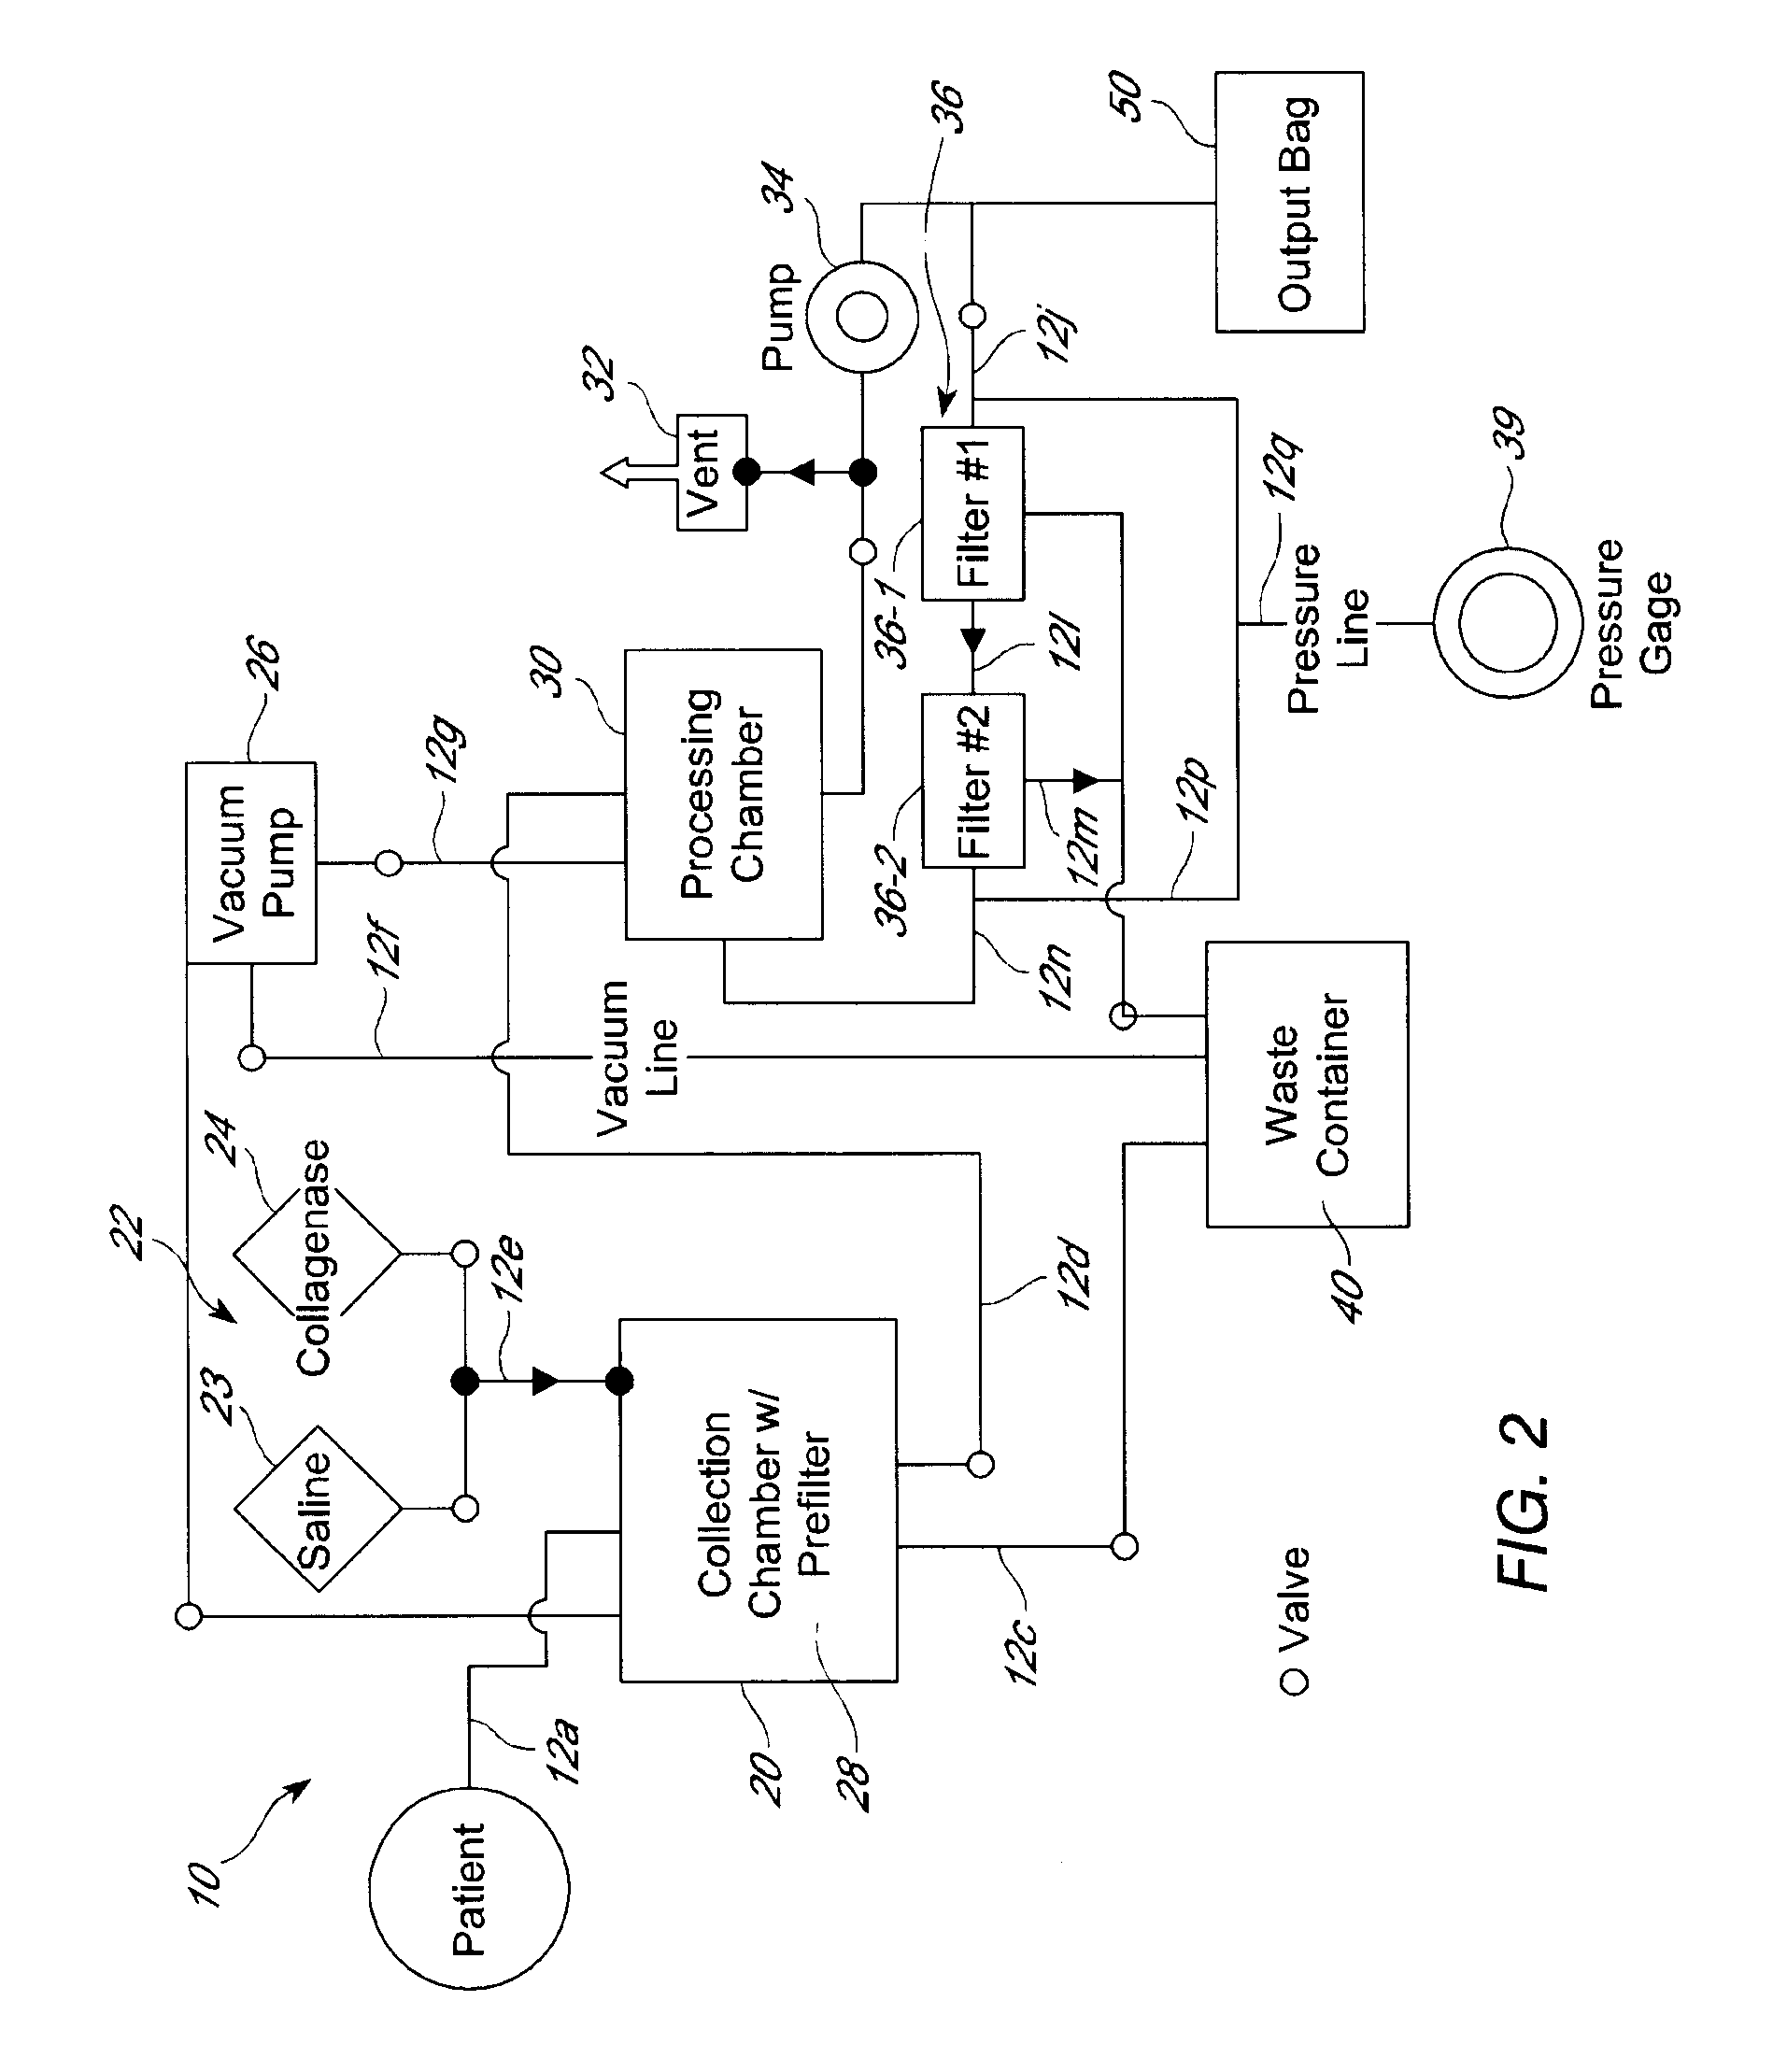 Methods of using adipose derived stem cells to promote wound healing